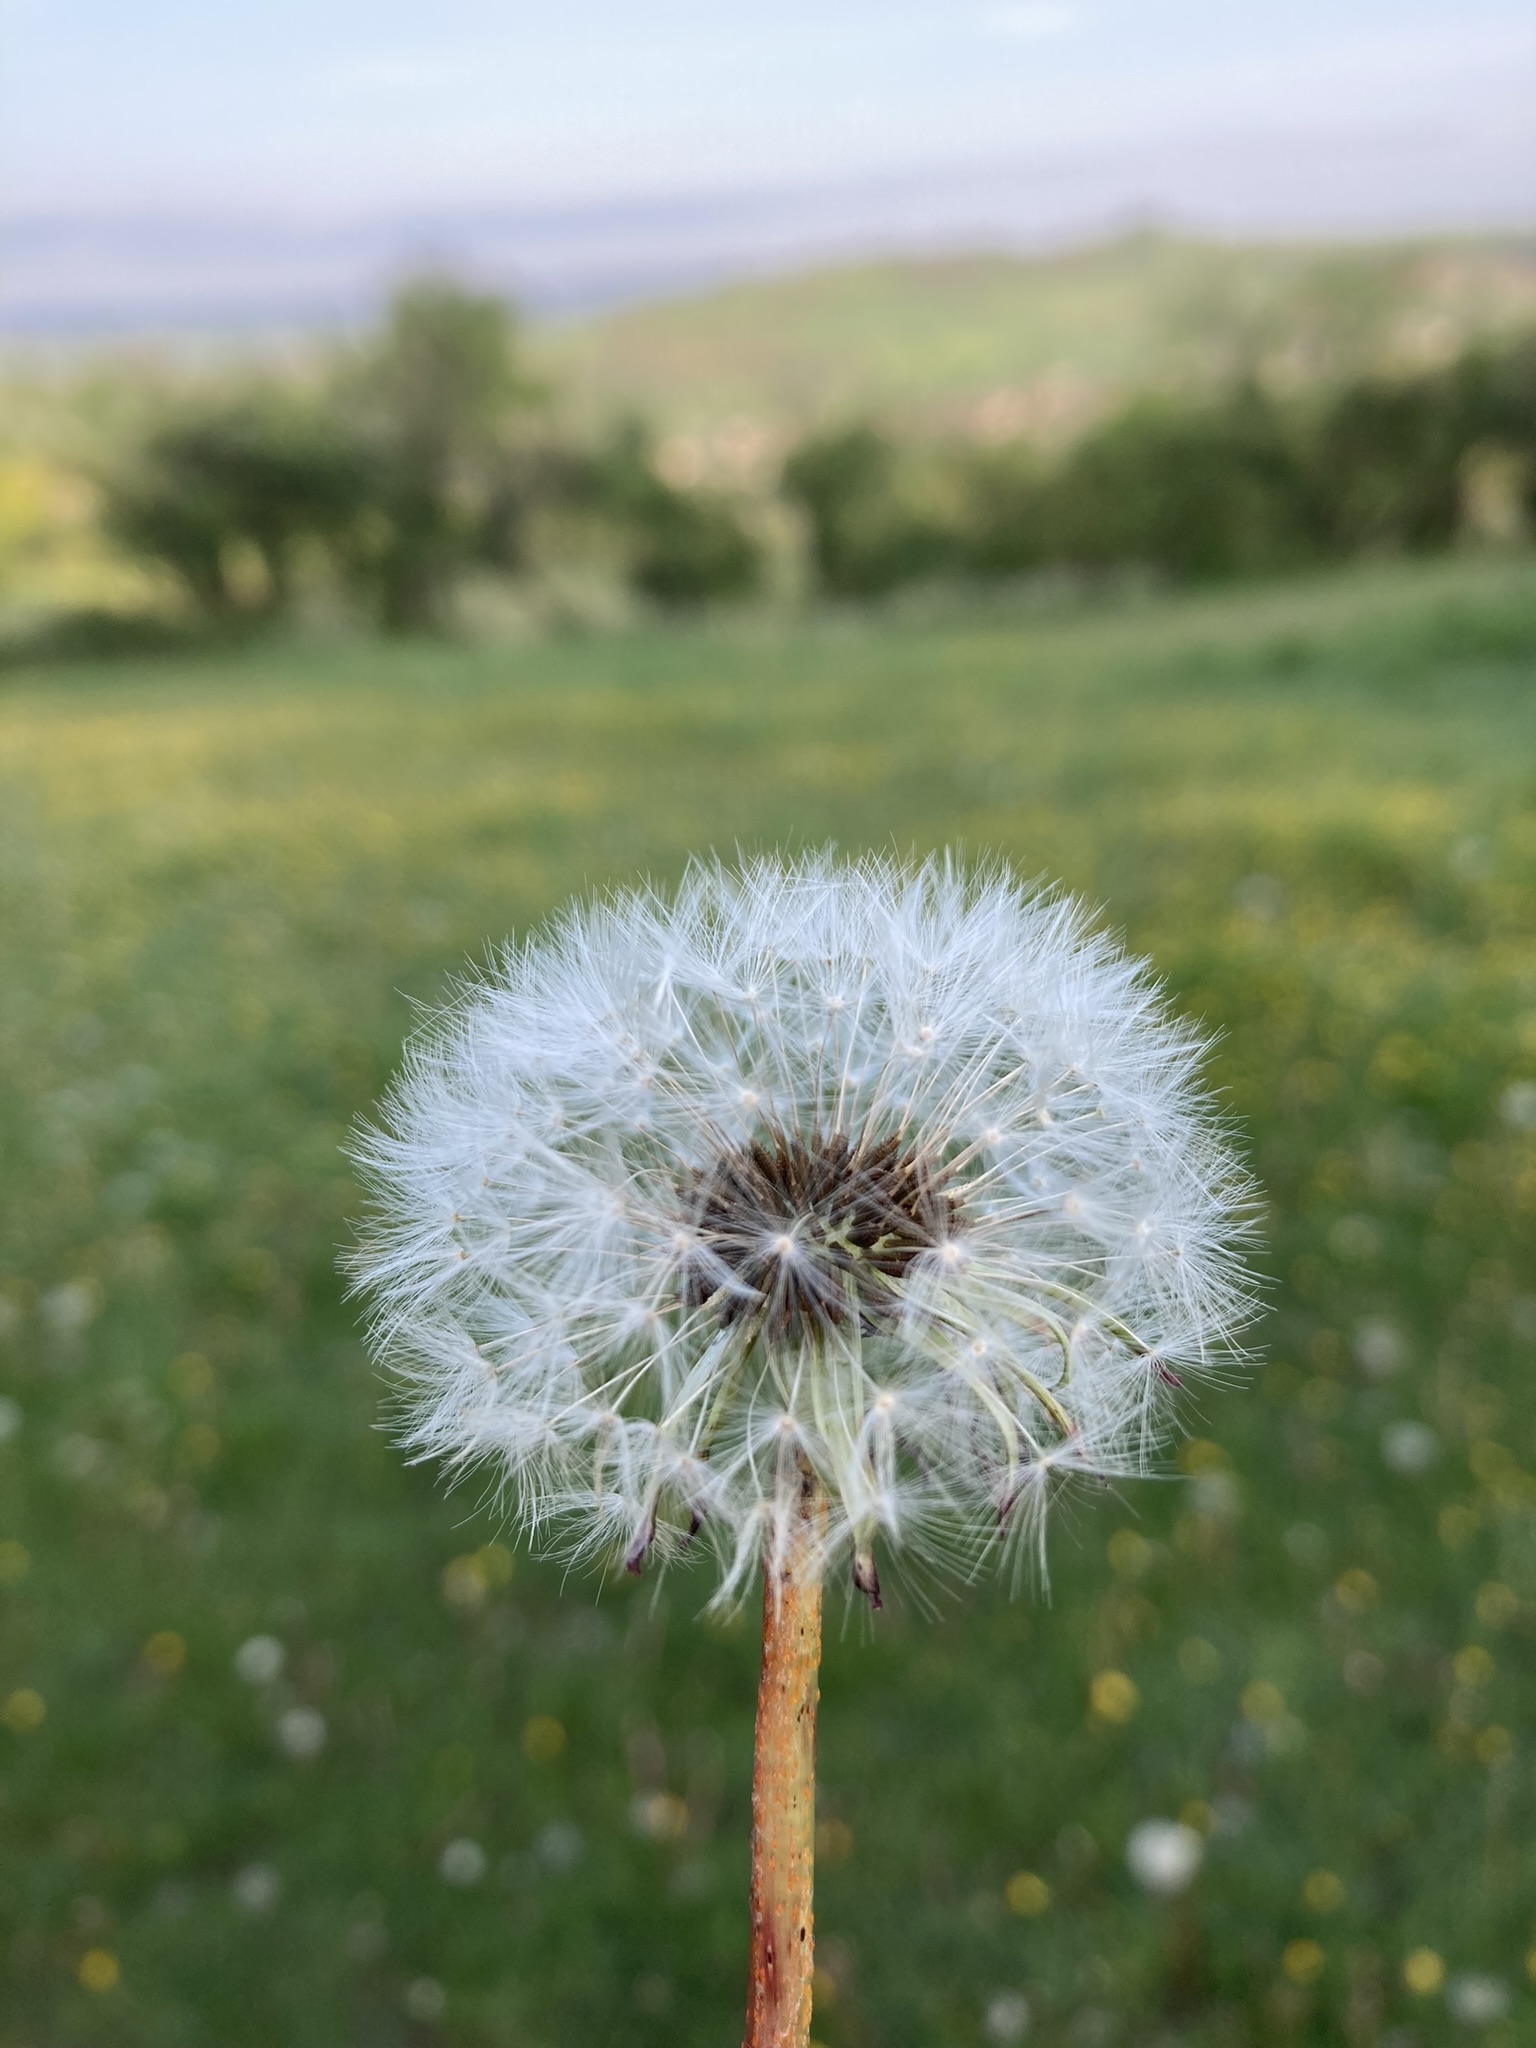 Dandelion seeds ready to be dispersed by the wind